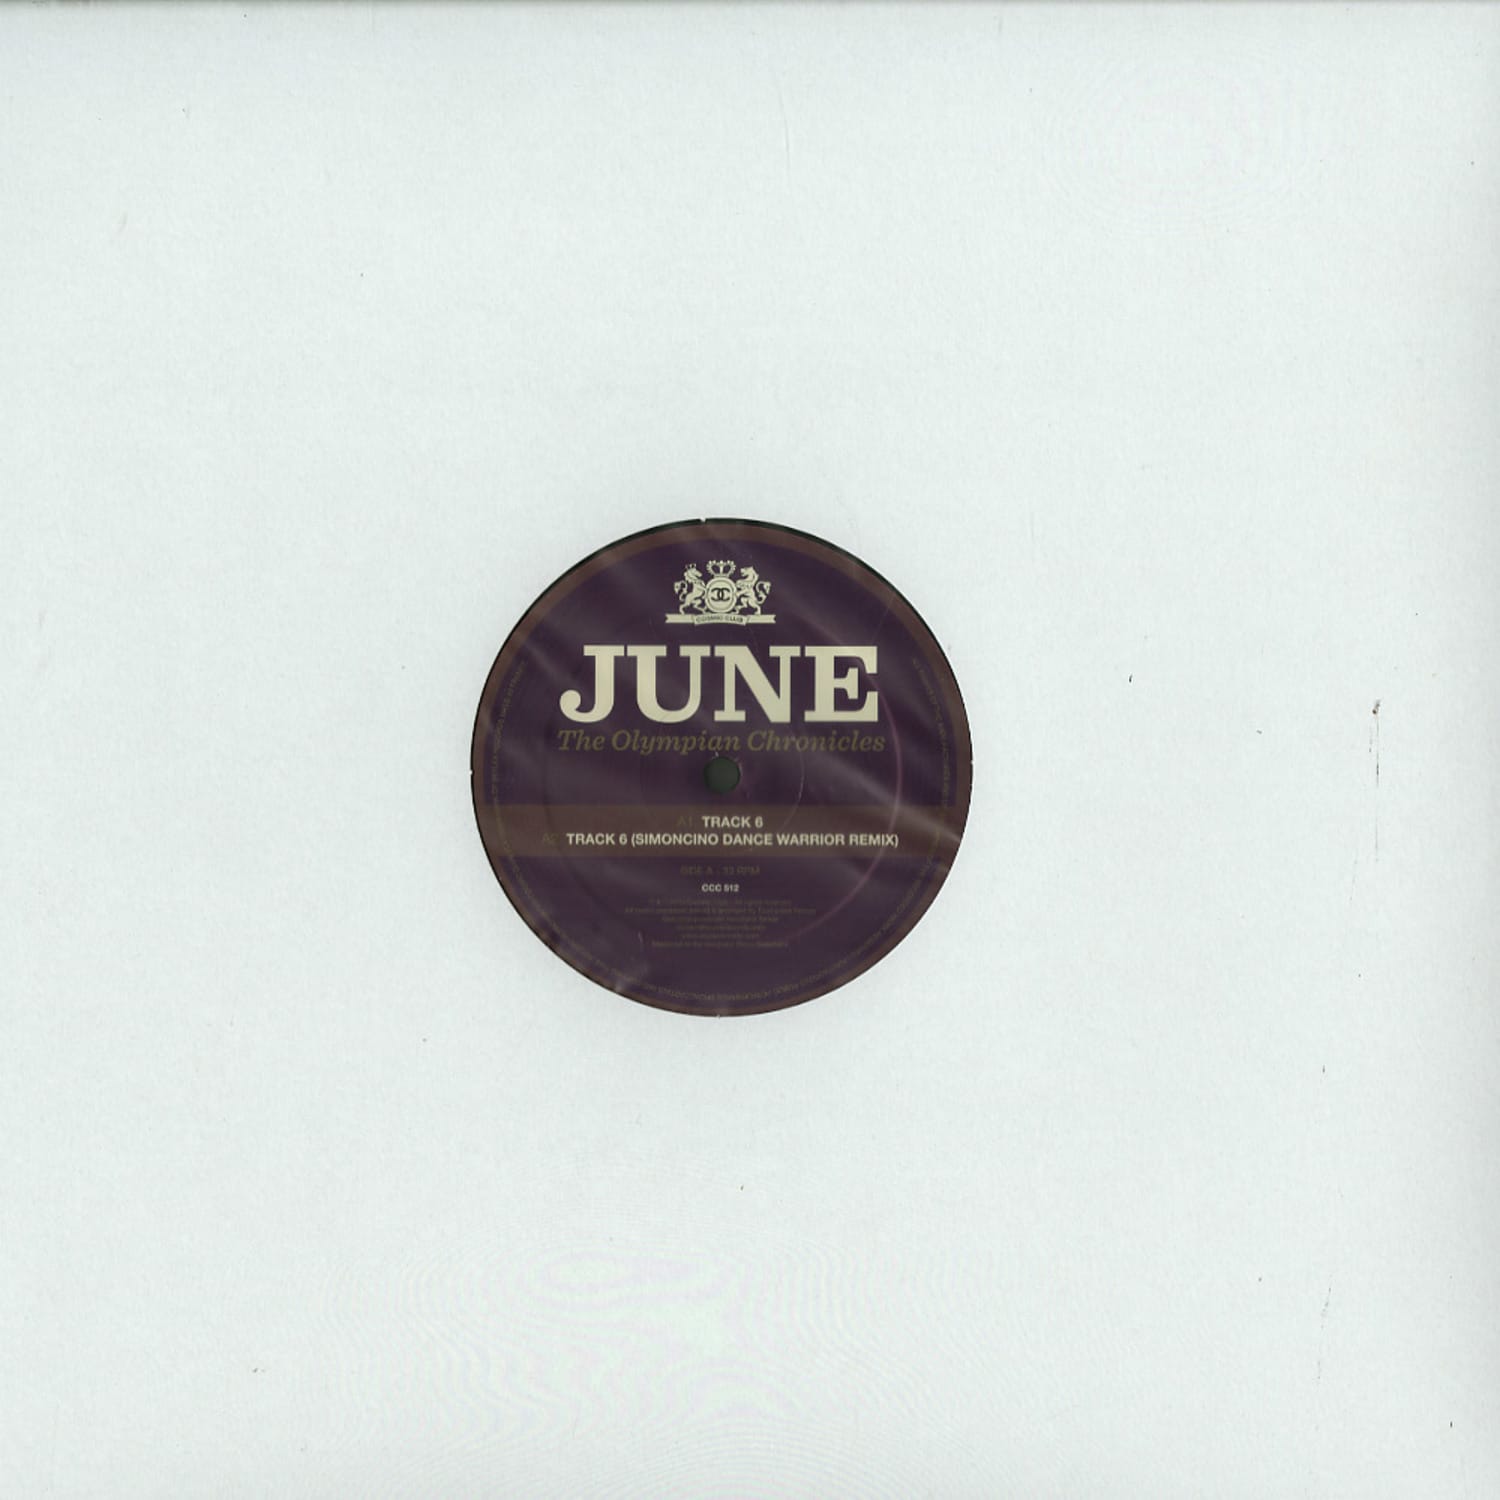 June - THE OLYMPIAN CHRONICLES 